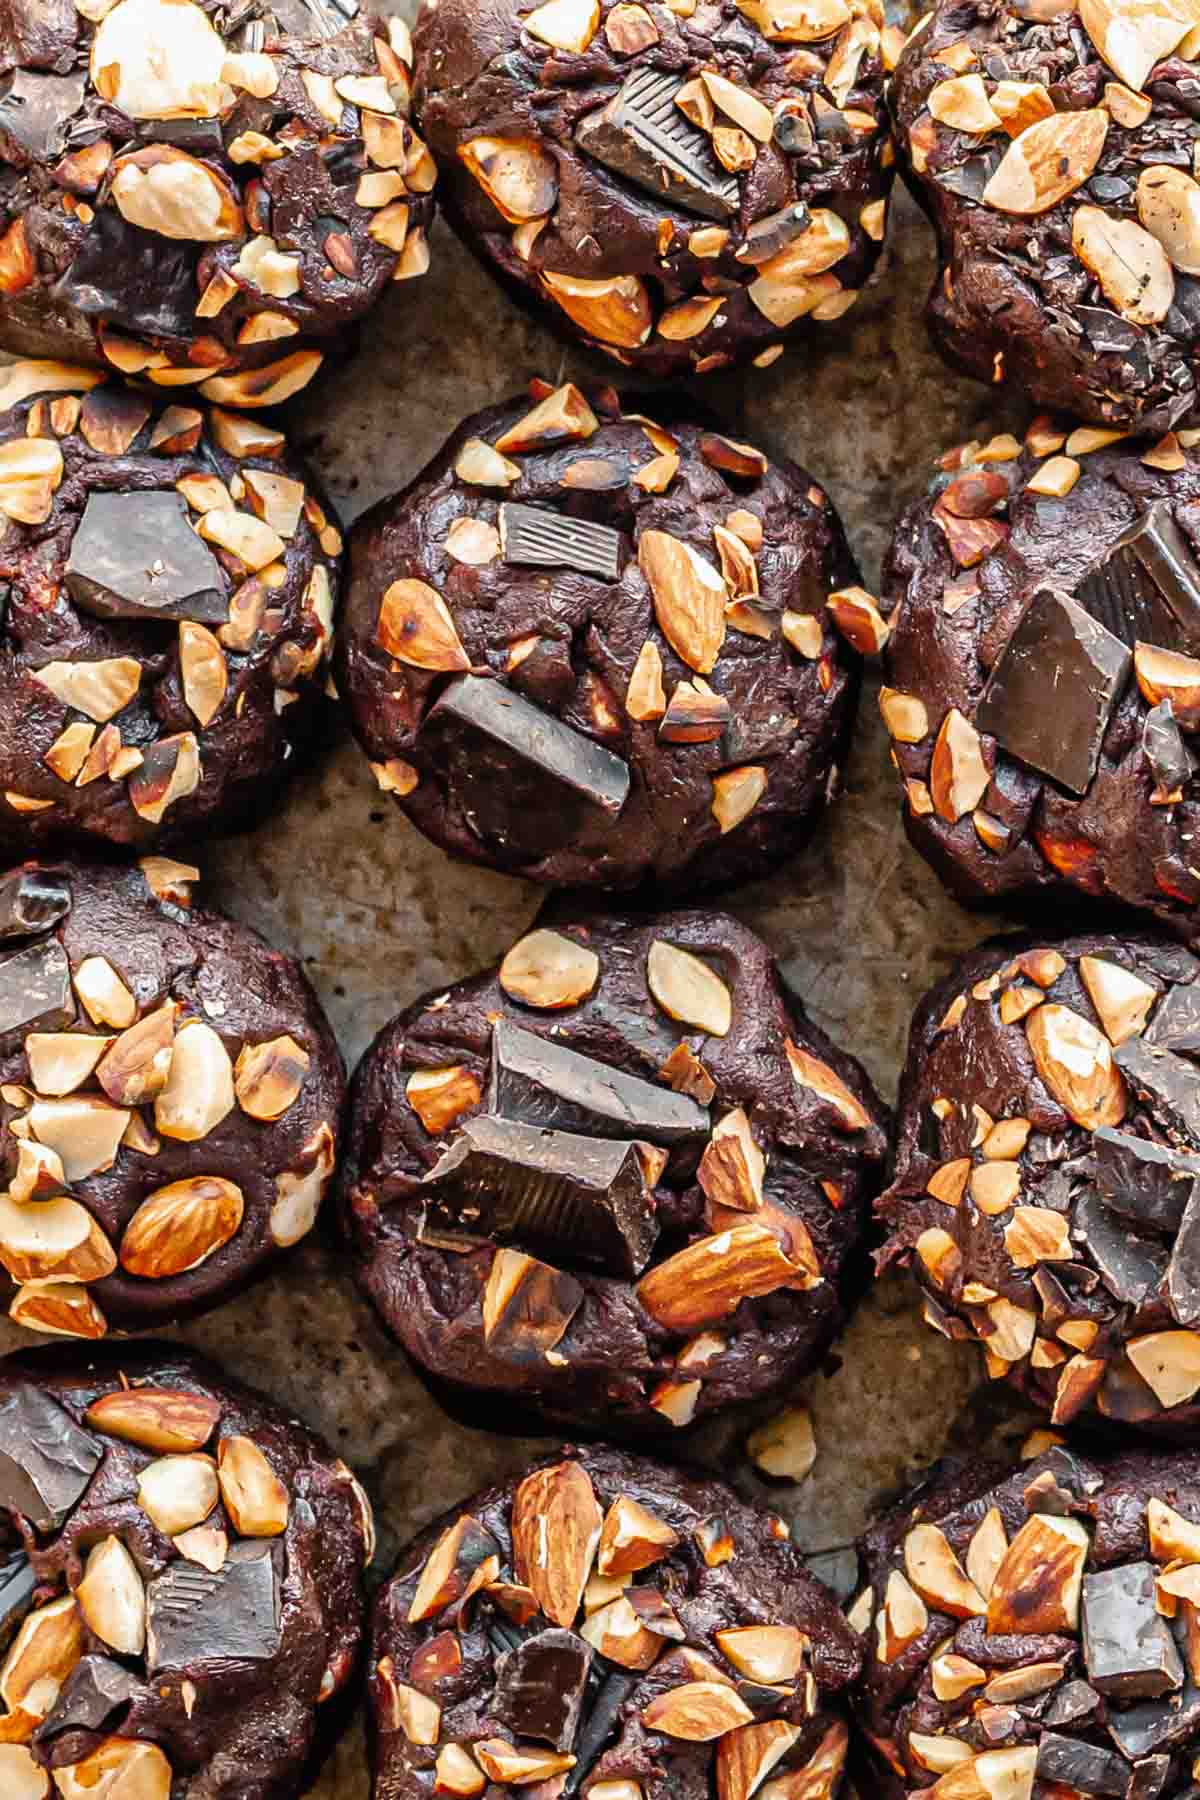 Cookie dough balls with chocolate and almond toppings.